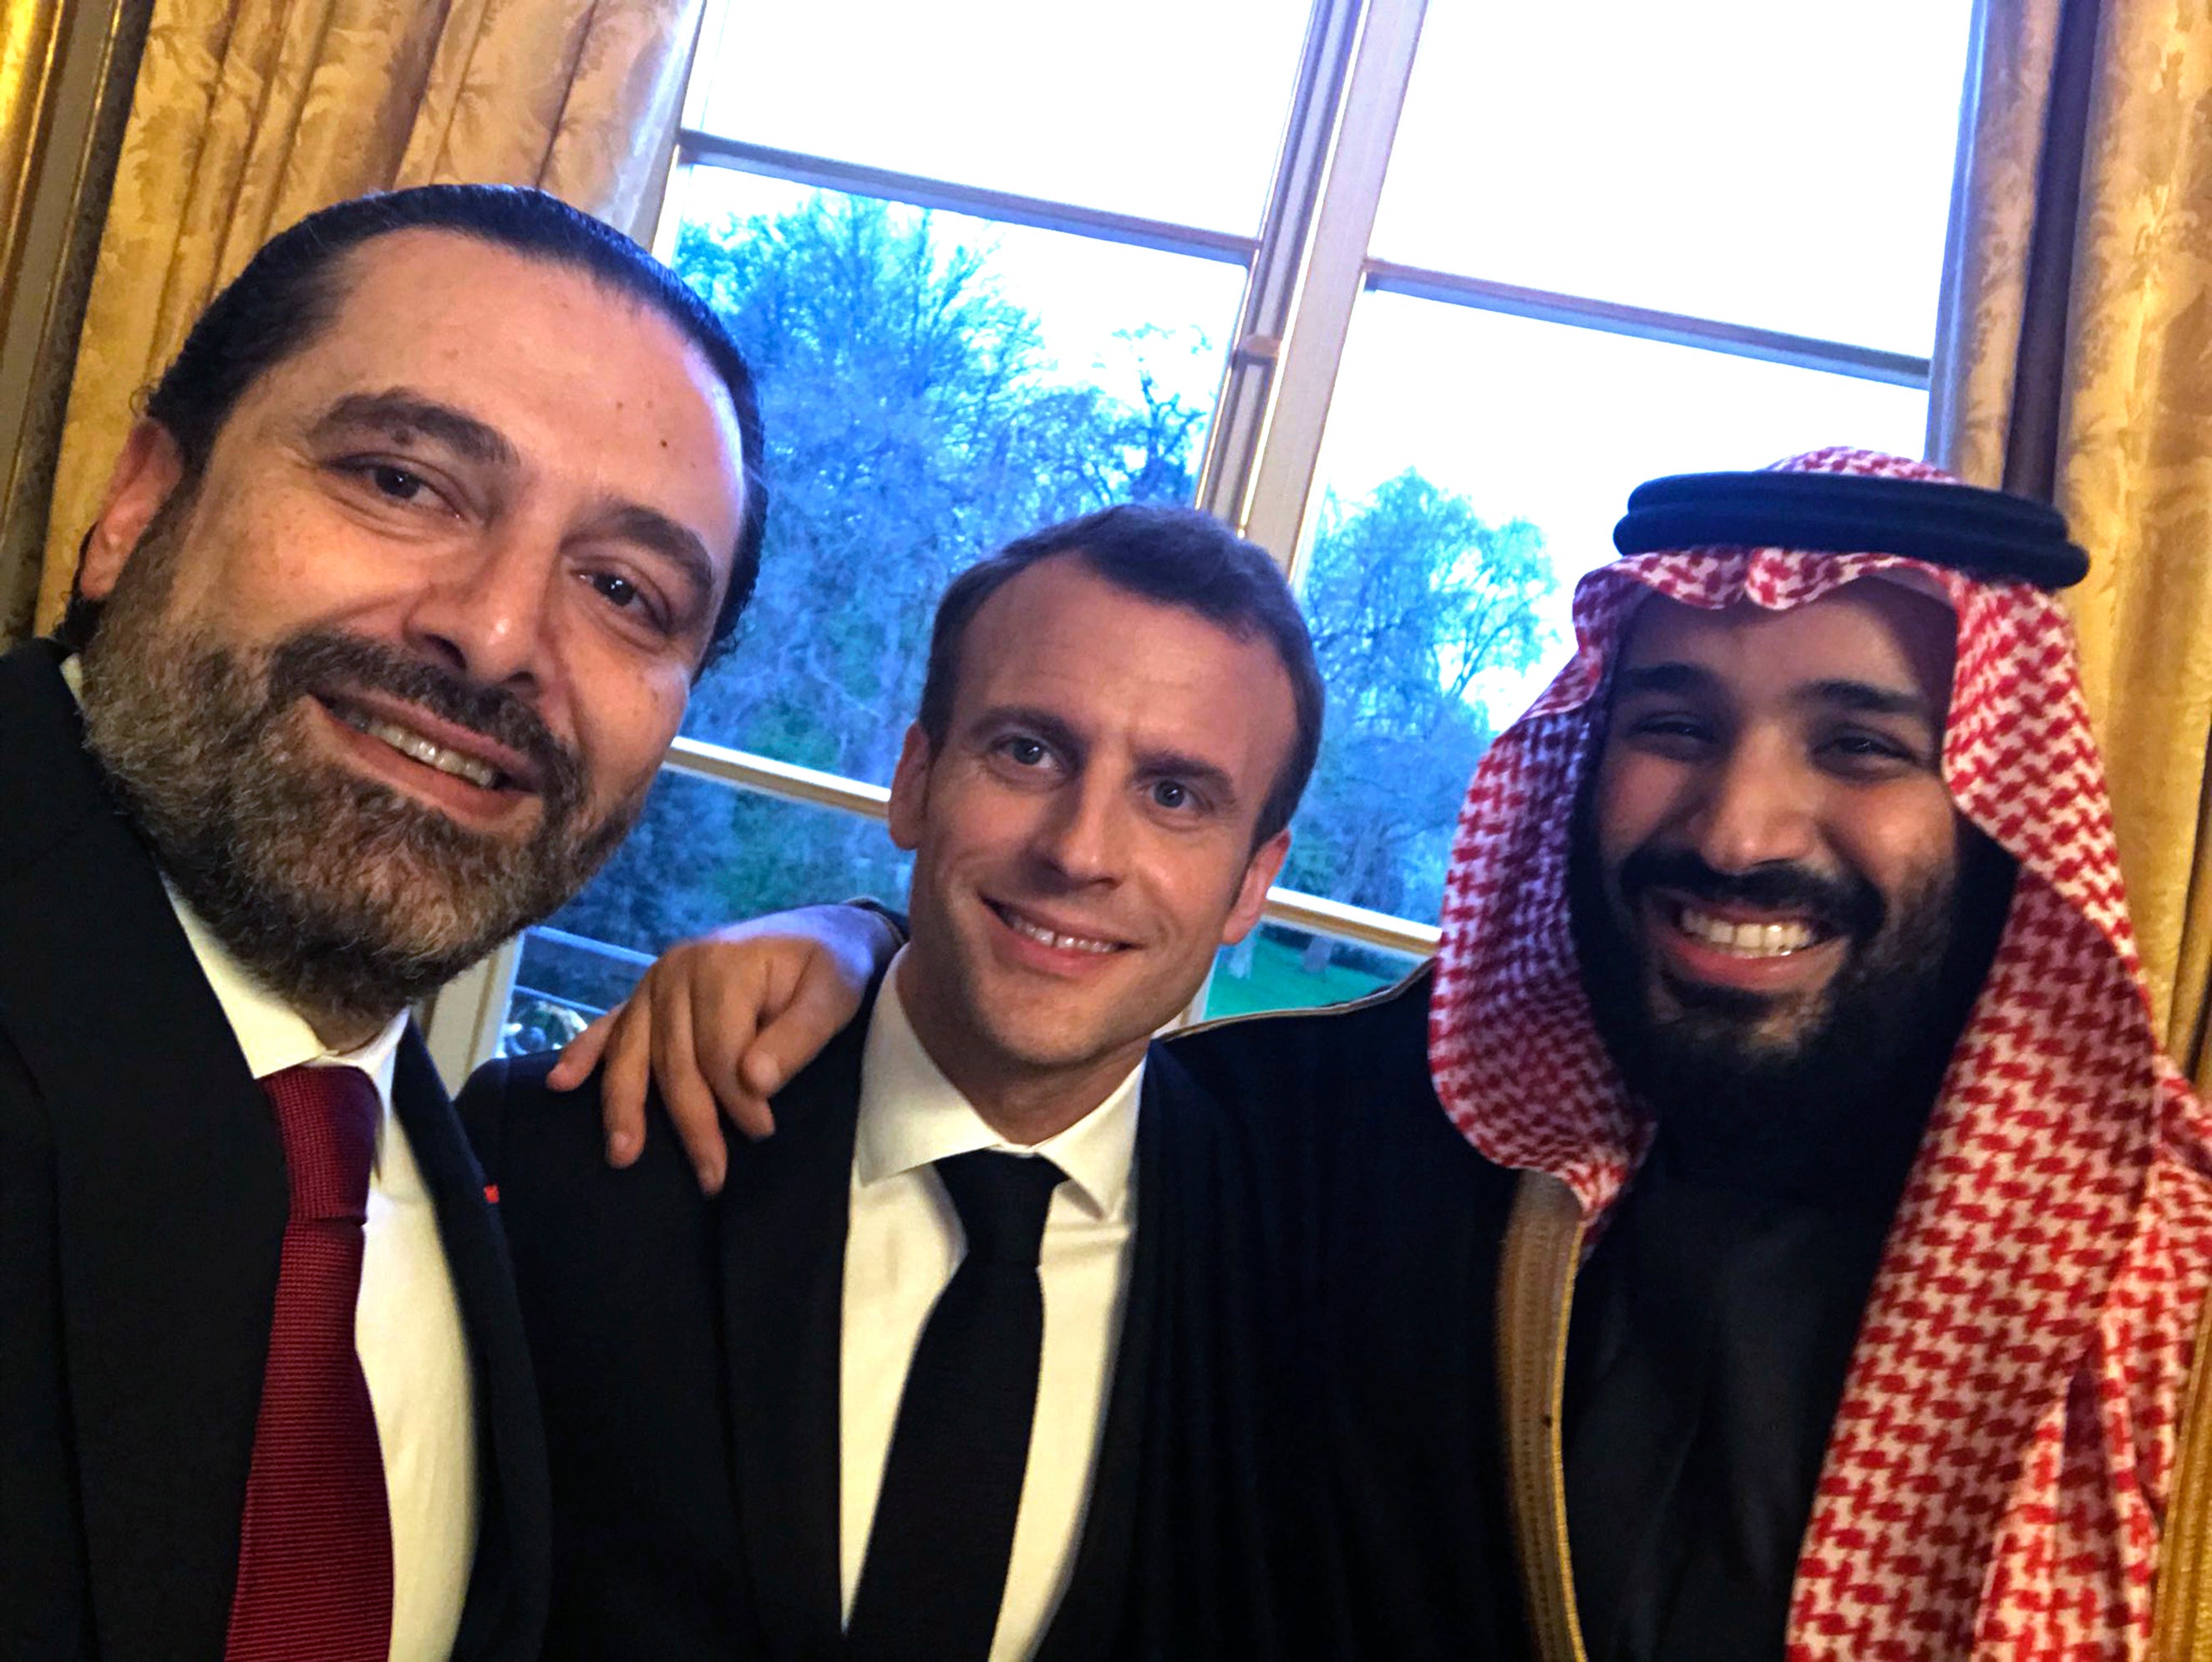 This photo released on the official twitter page of Lebanese Prime Minister Saad Hariri in April 2018, shows Hariri, left, taking a selfie photo with French President Emmanuel Macron, center, and Saudi Arabia's Crown Prince Mohammed bin Salman, right, in the King George V Hotel, in Paris, France